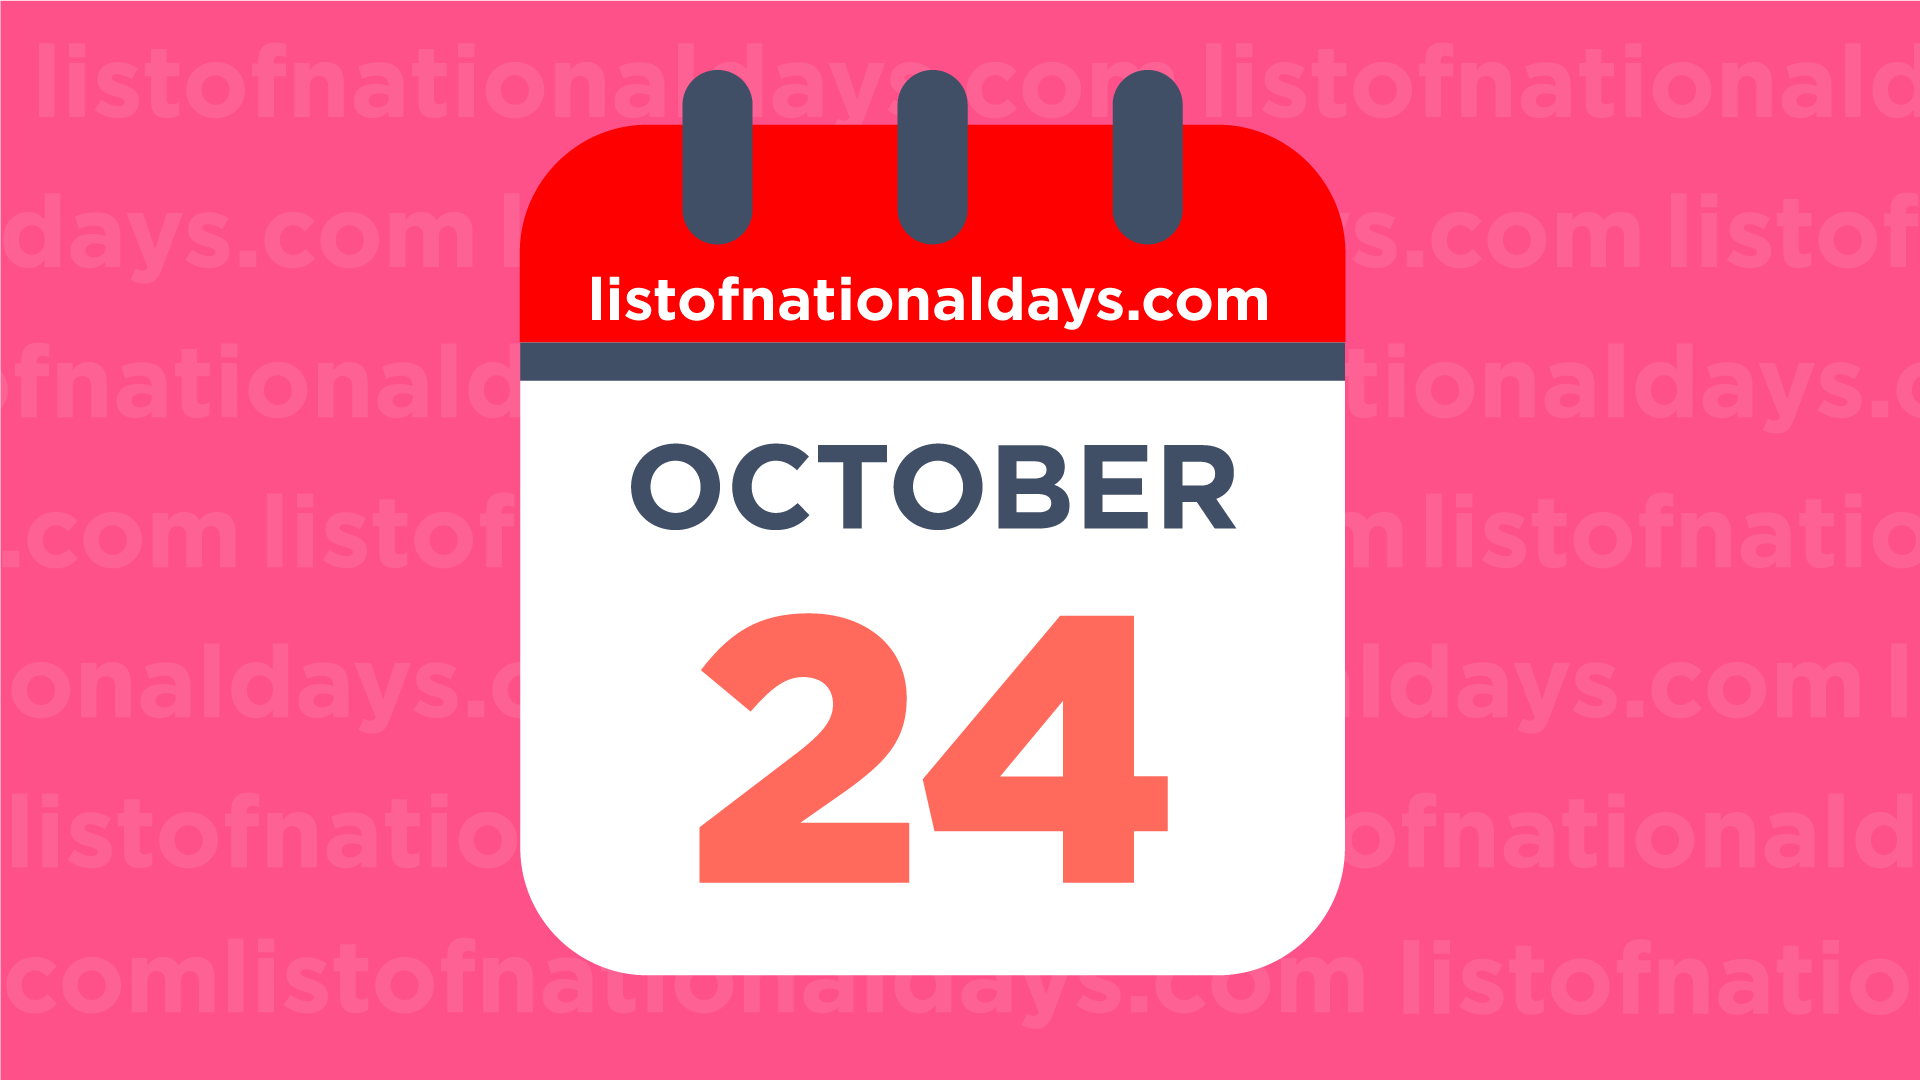 OCTOBER 24TH List Of National Days